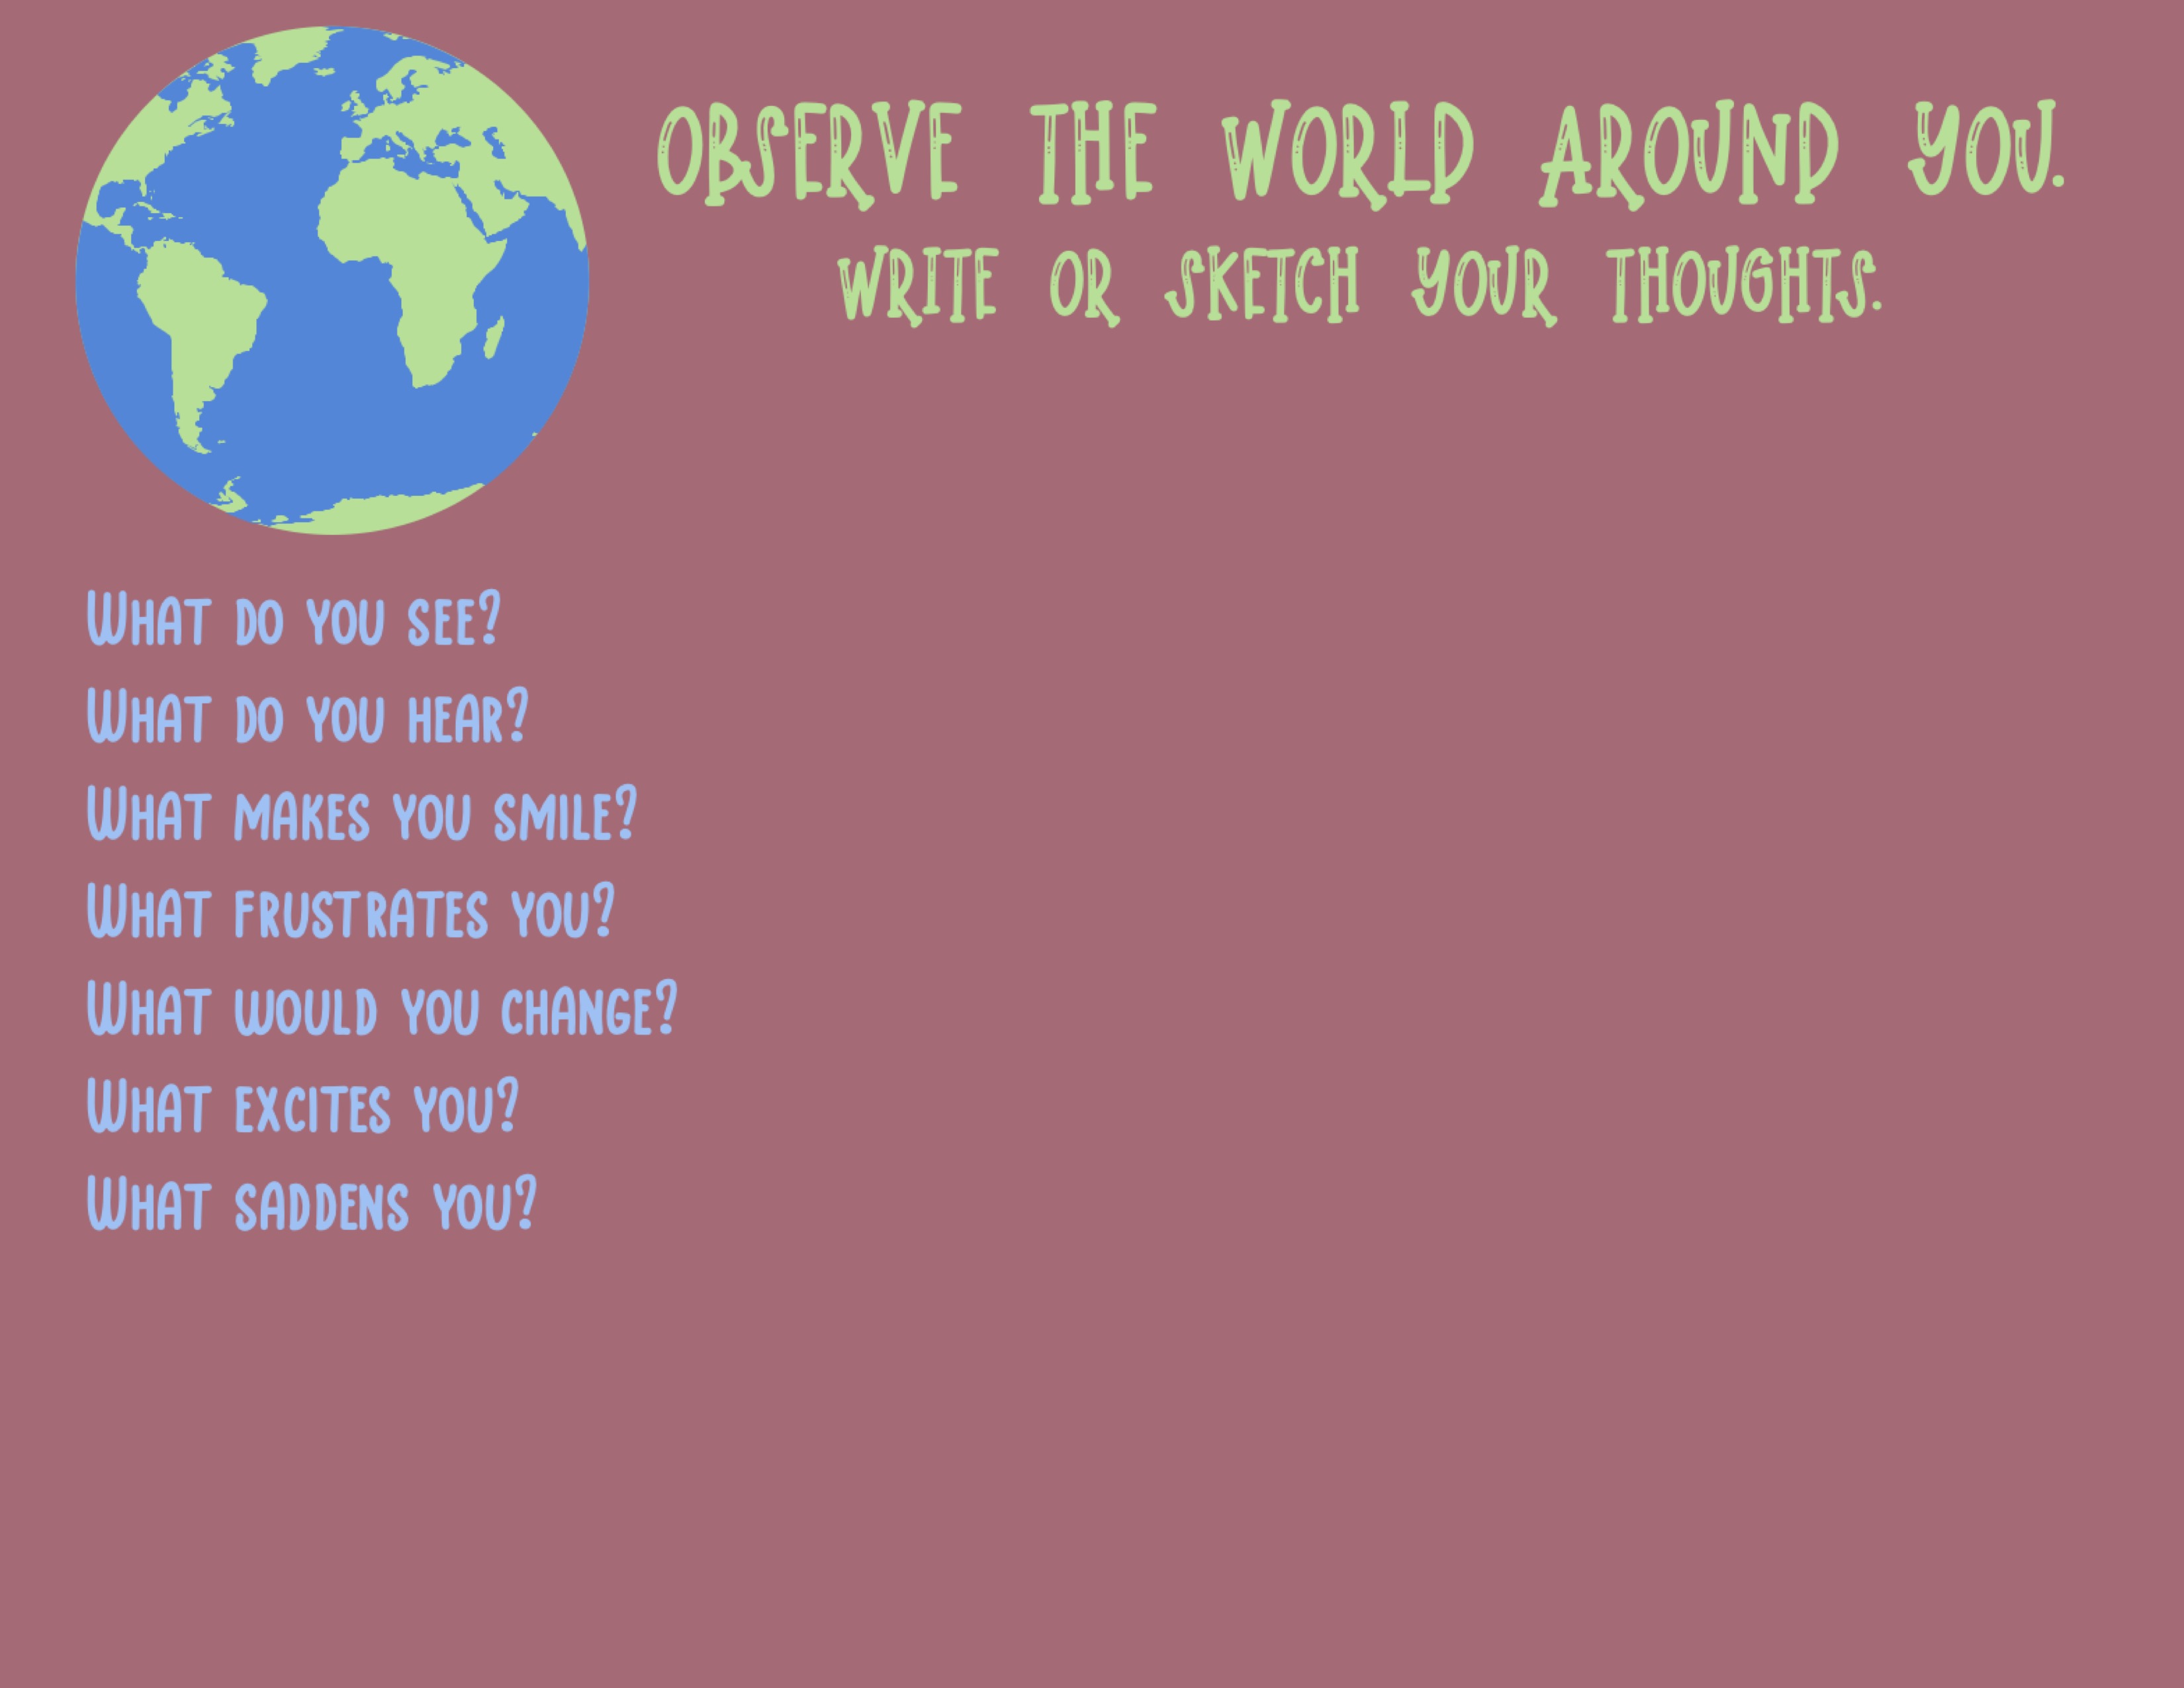 Observe the world around you